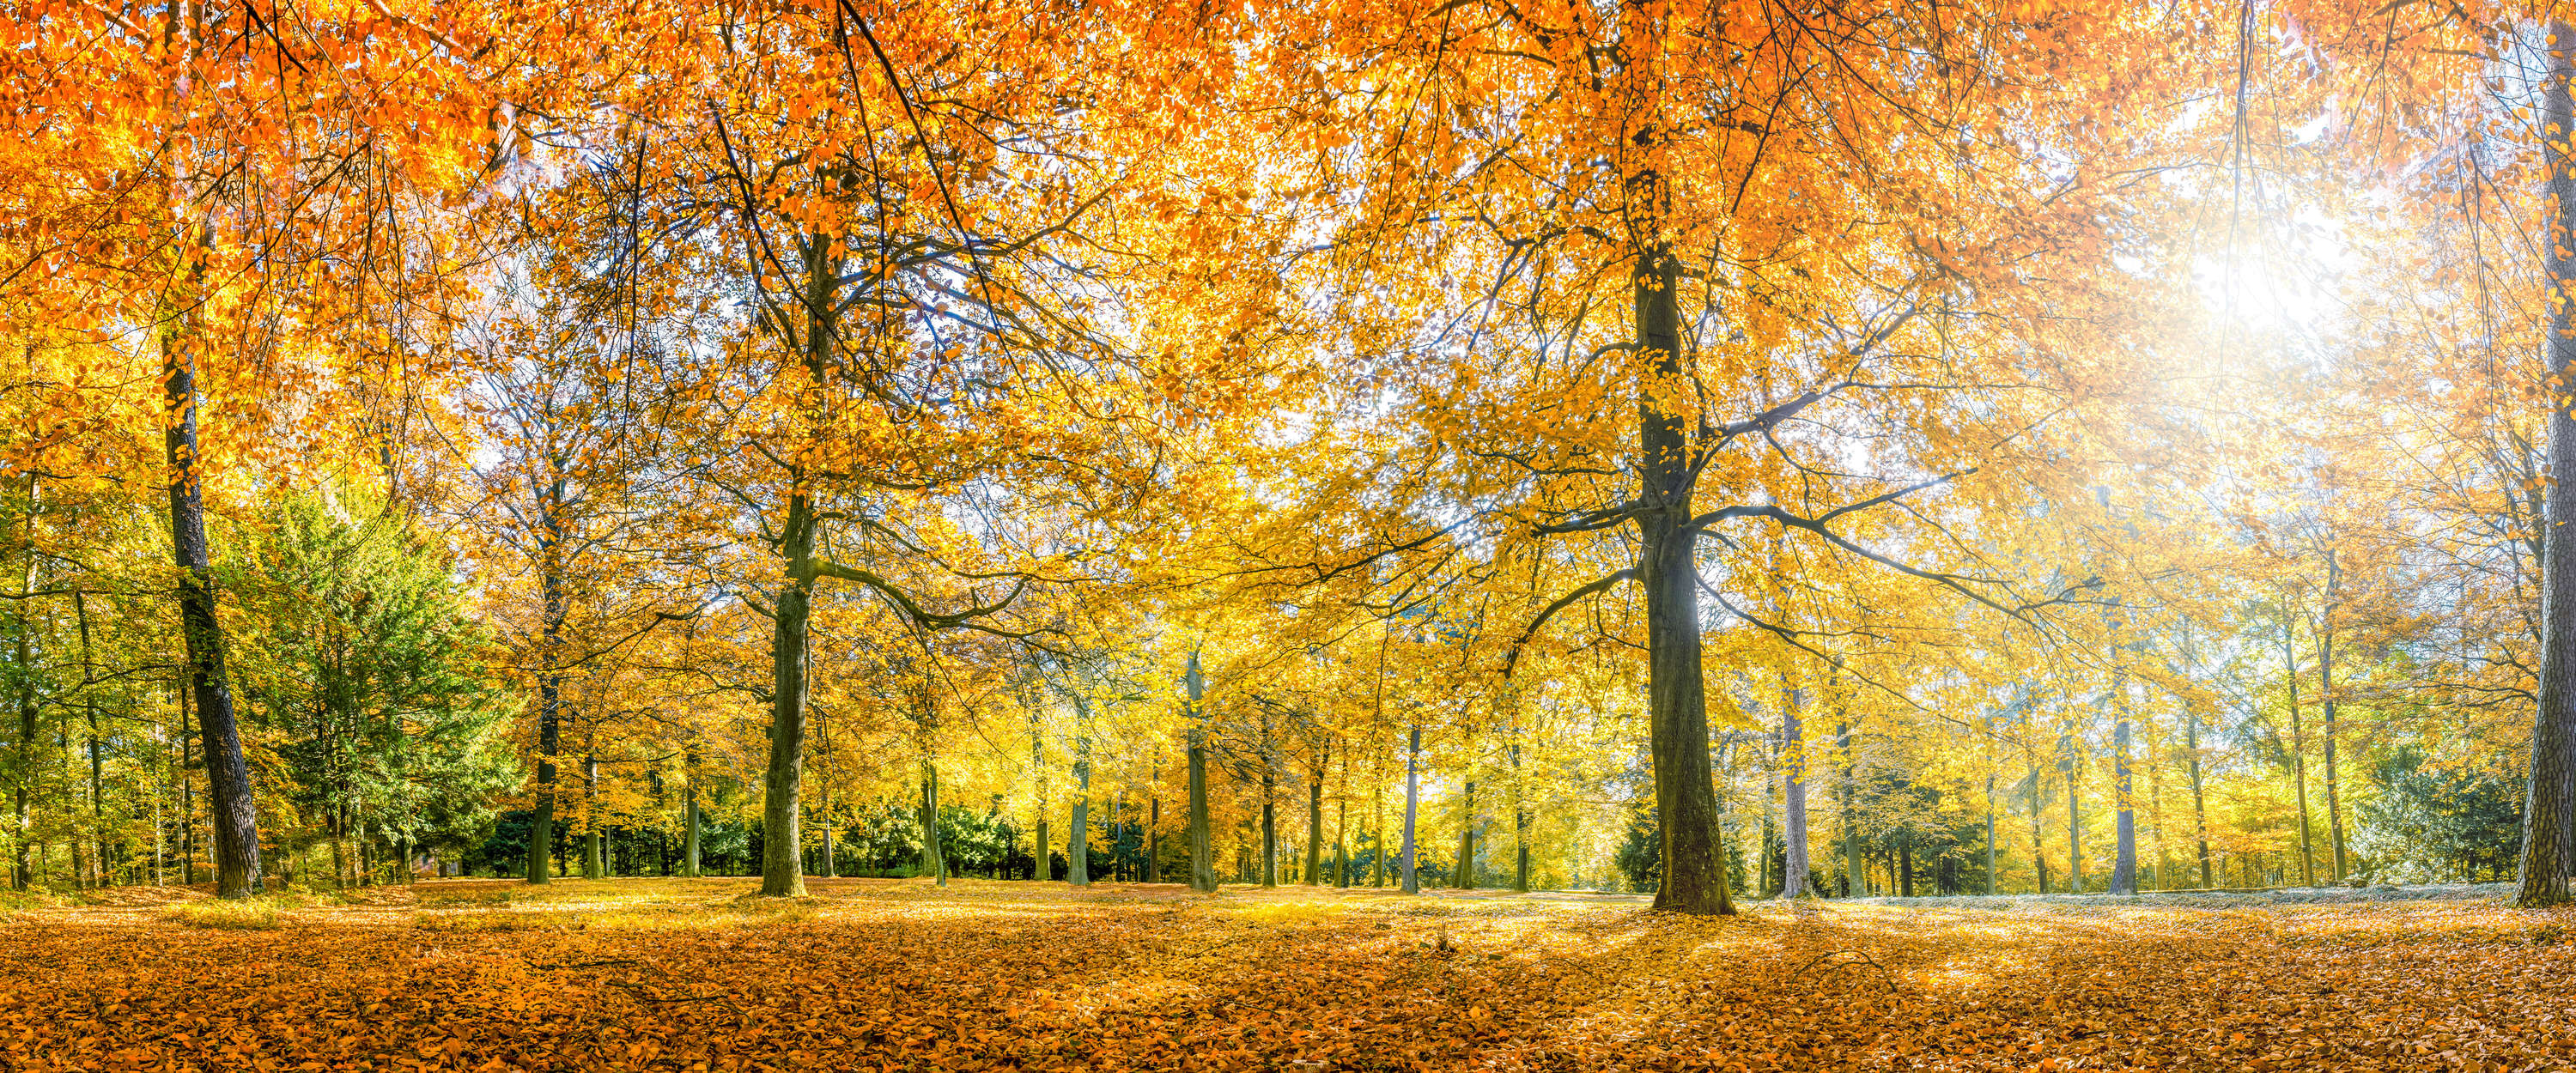             Photo wallpaper forest in autumn with yellow deciduous trees
        